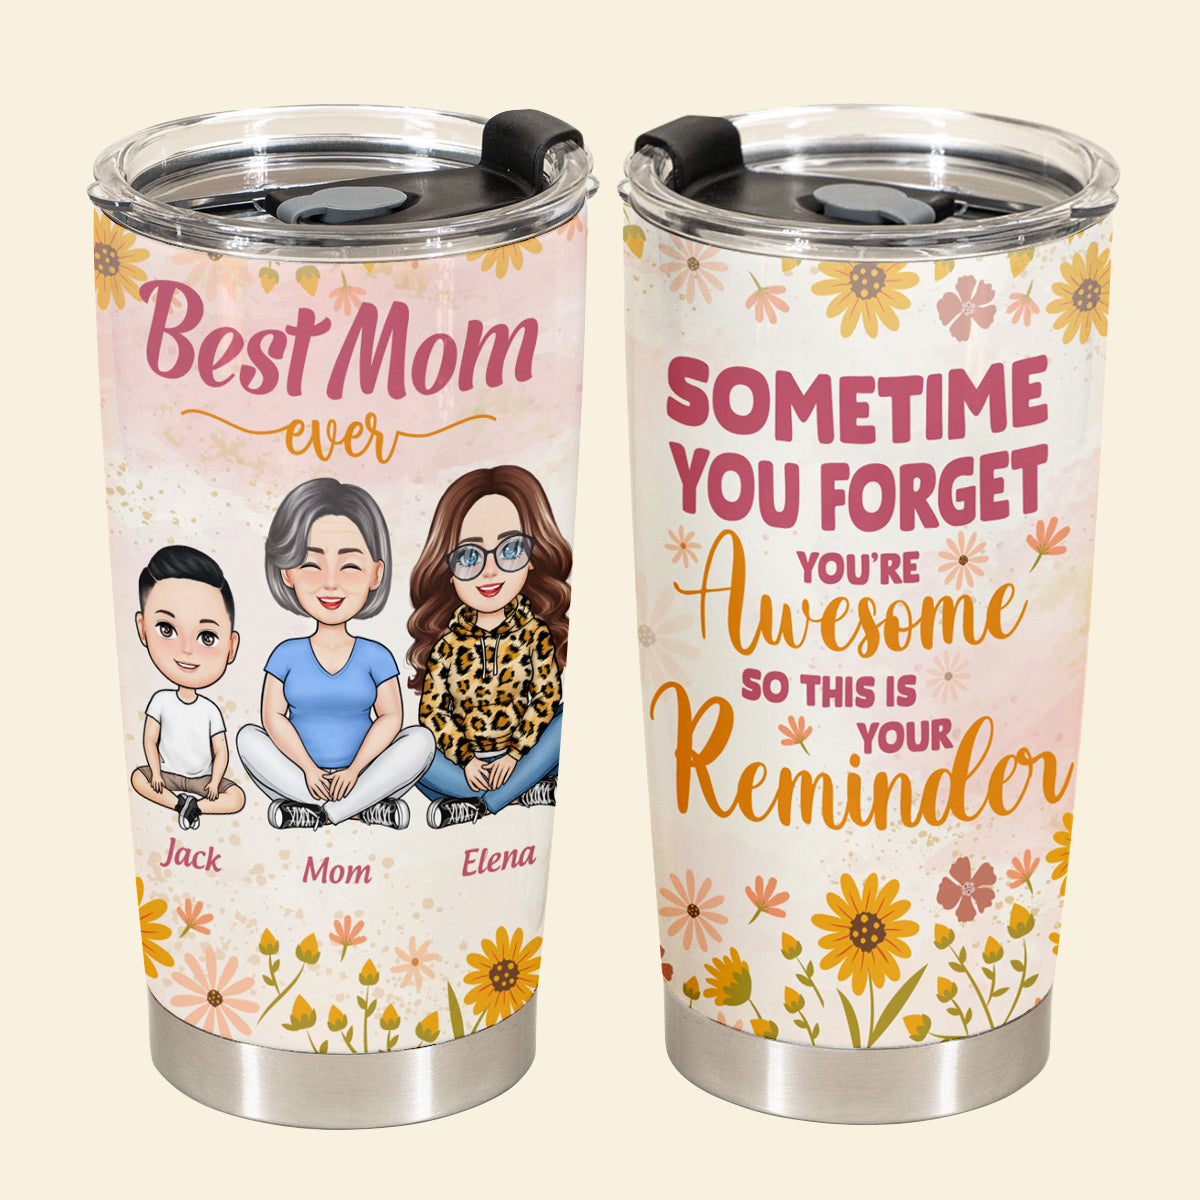 Sometimes You Forget You Are Awesome - Personalized Tumbler - Gift For Mom, Mother's Day, Birthday Gift